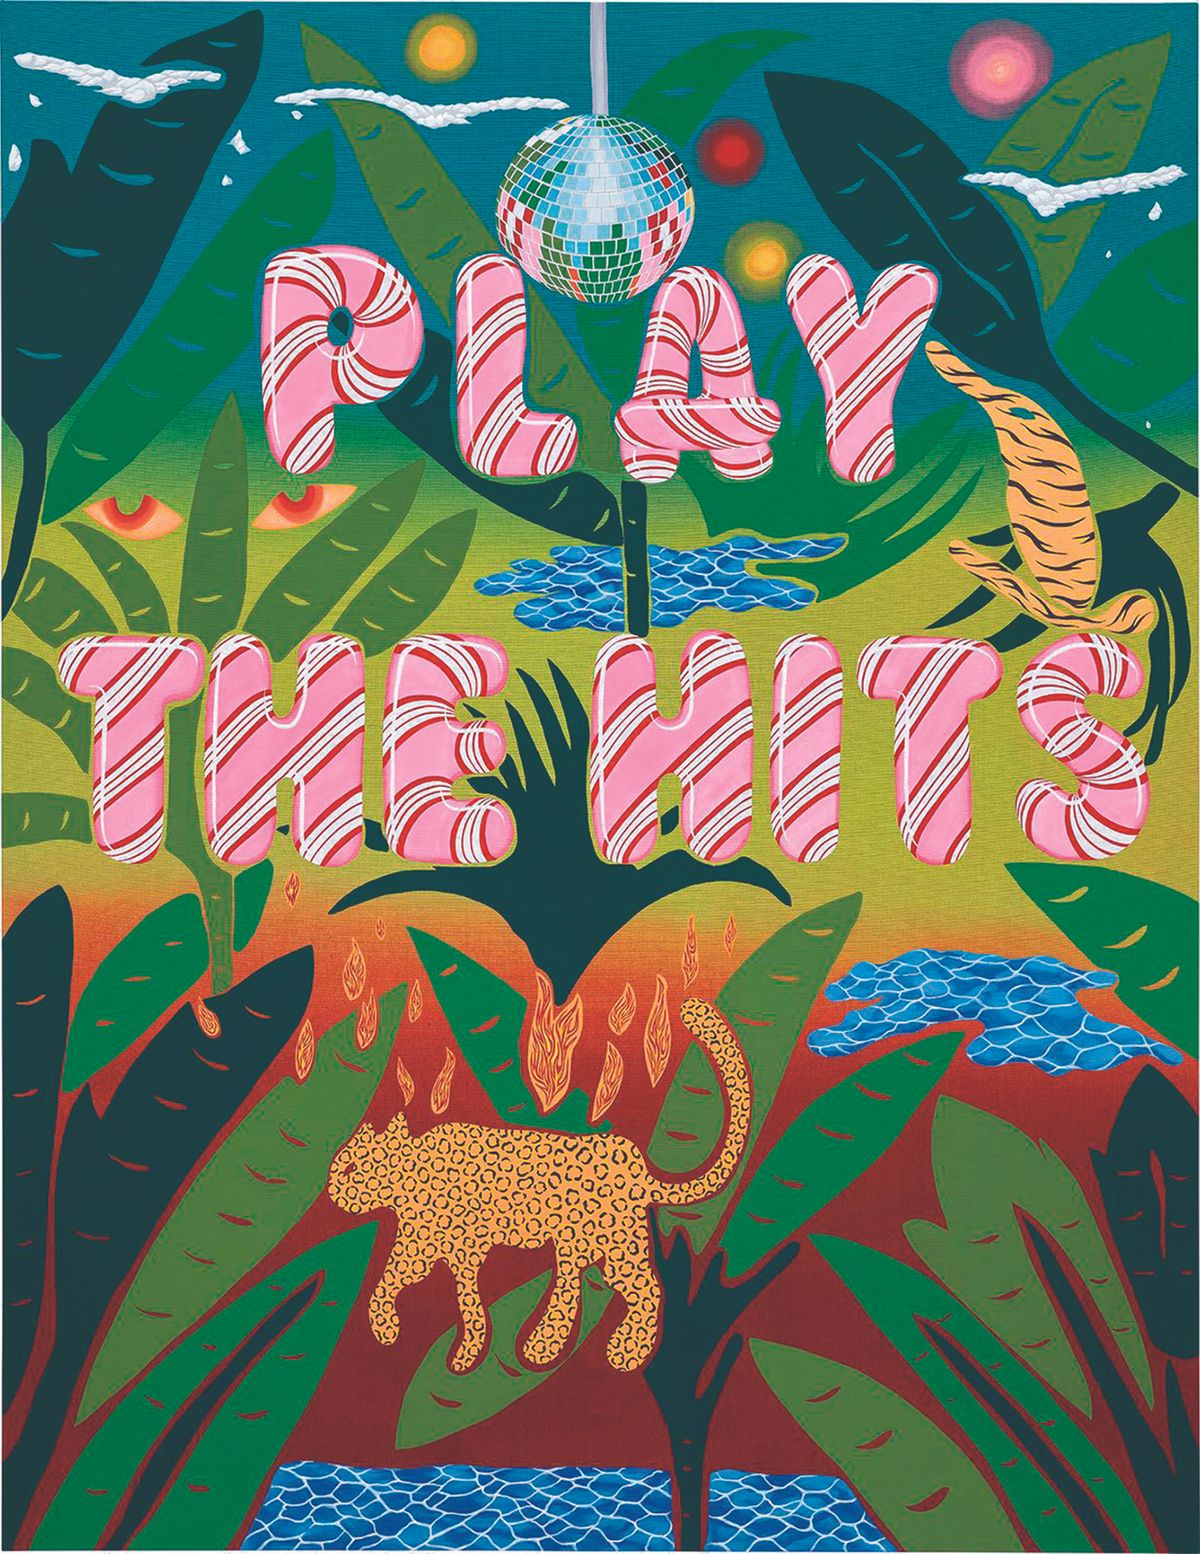 Hot ticket: Untitled (Play the Hits) (2021) by Joel Mesler, who turned from dealing art to making it, sold for £533,000—more than three times its low estimate—last month

© Joel Mesler